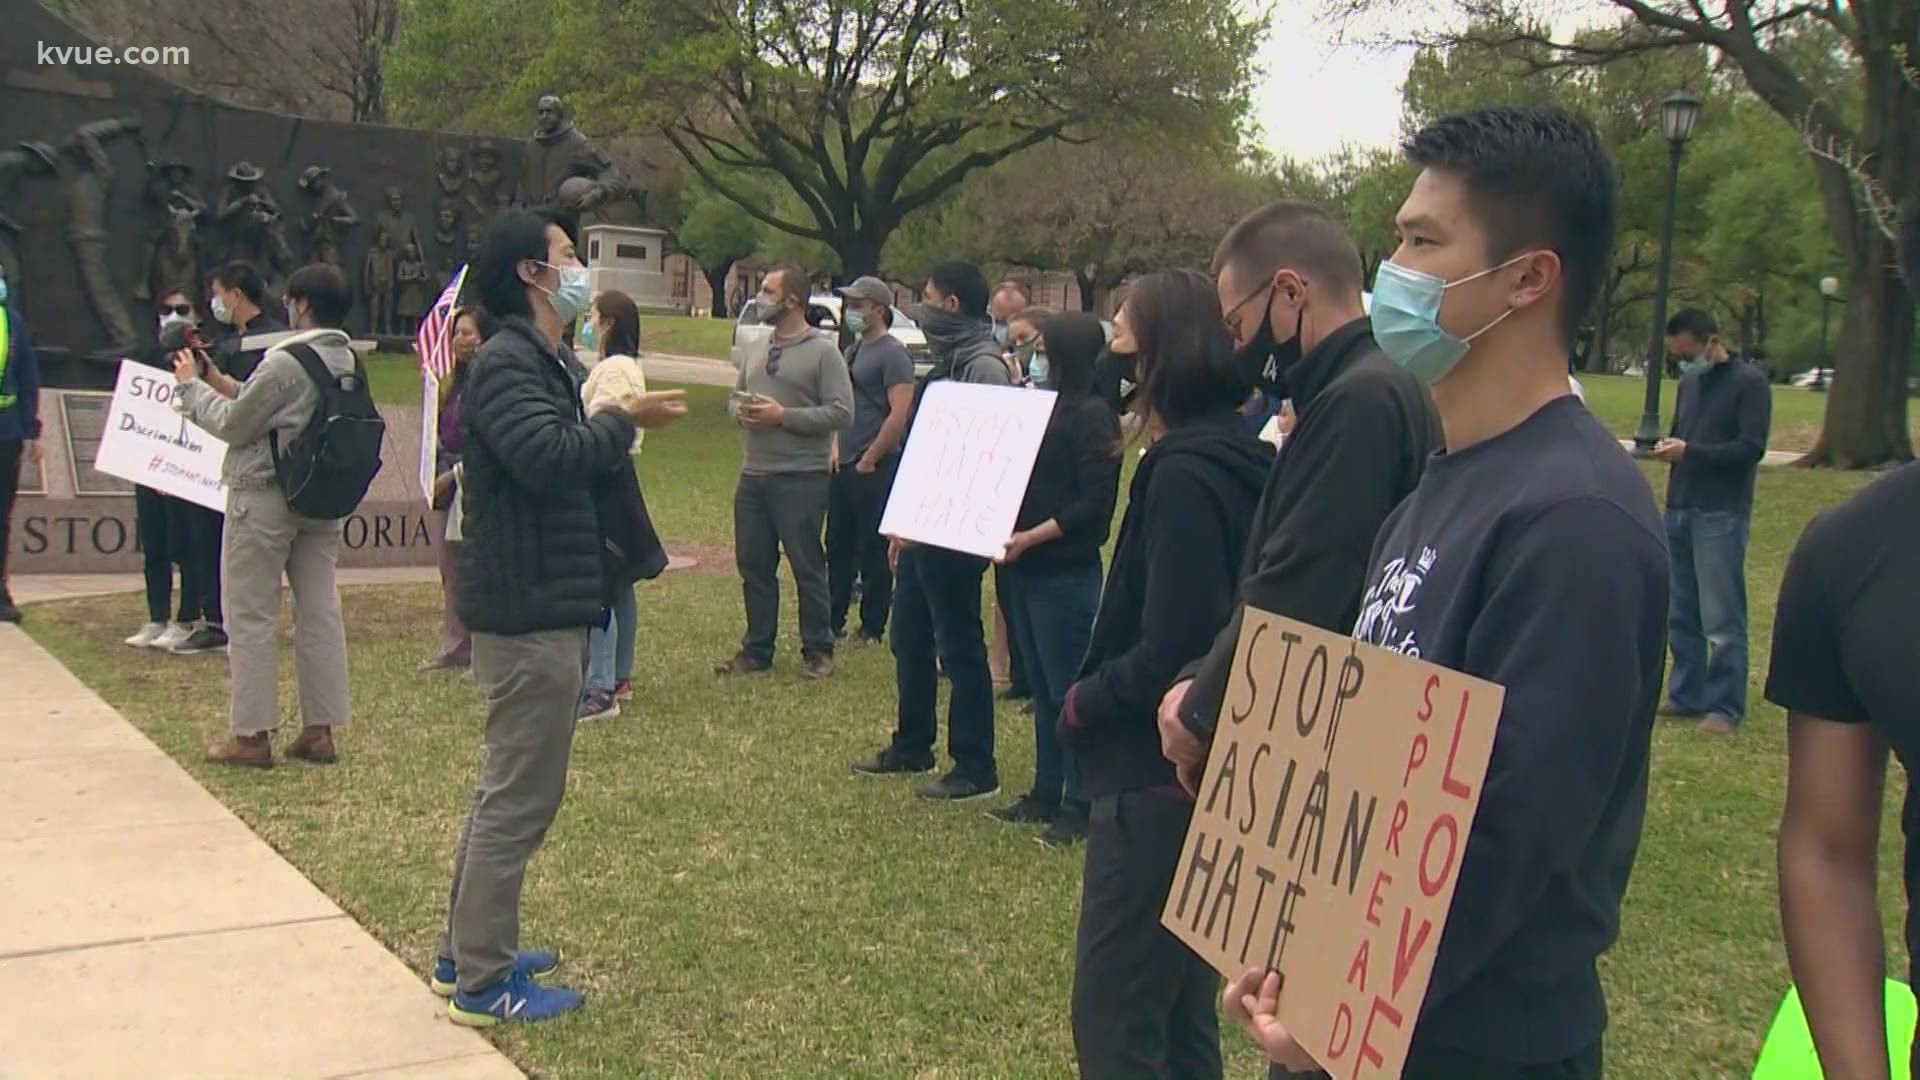 Demonstrators gathered at the Texas Capitol on Friday to speak out against Asian hate crimes. Organizer Chuck Guo said he can't watch his community get hurt.